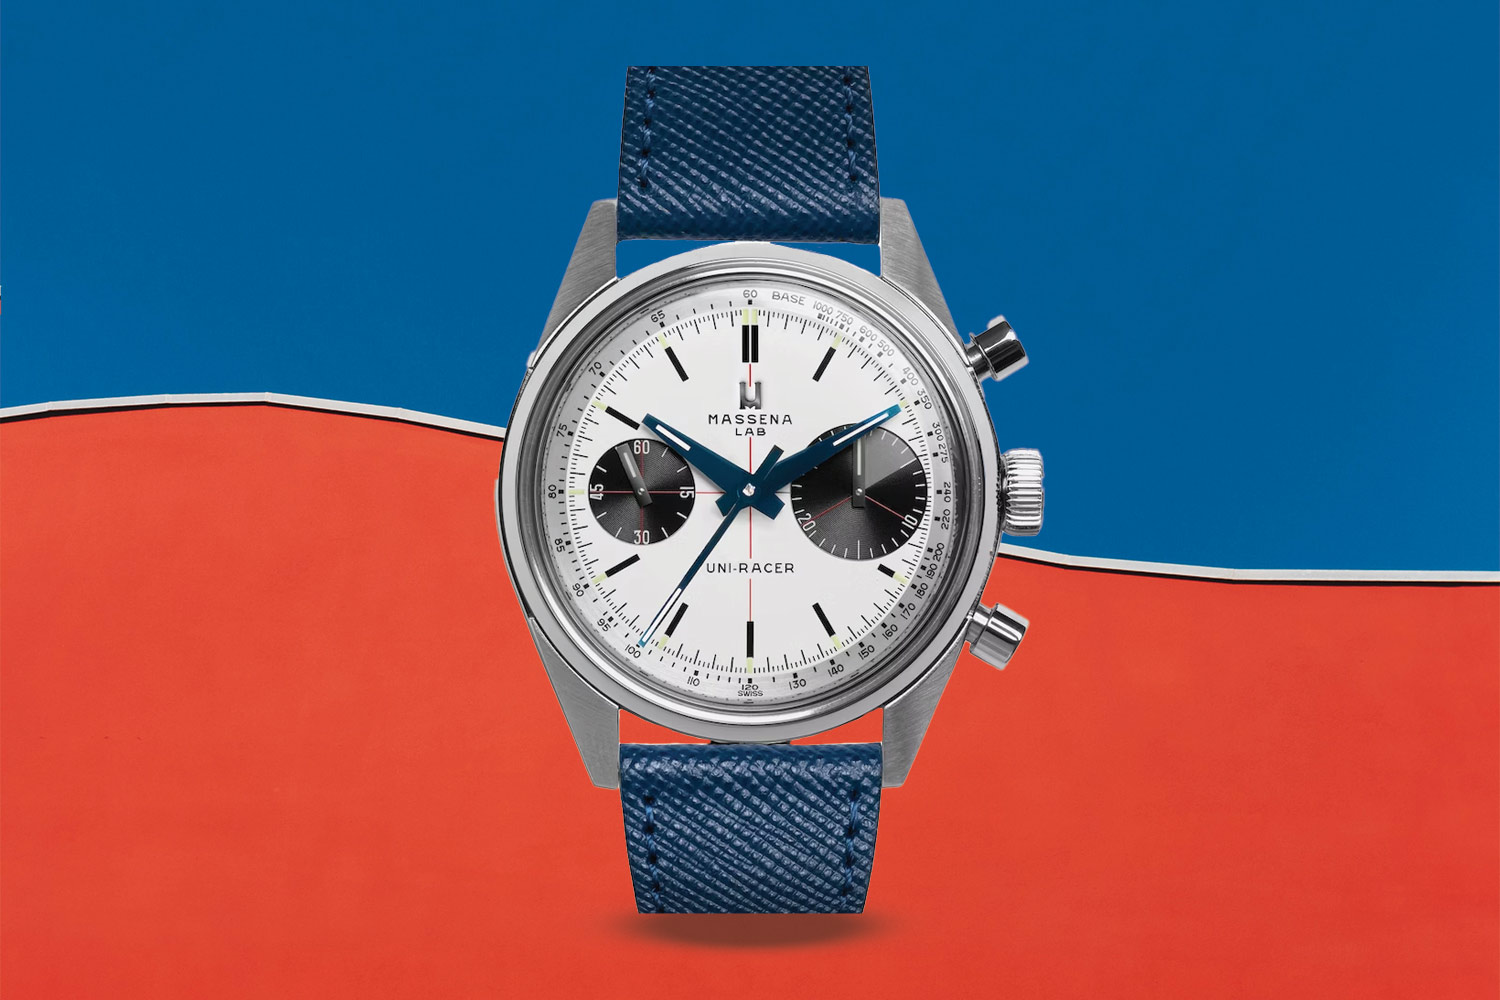 Blue, white and black watch